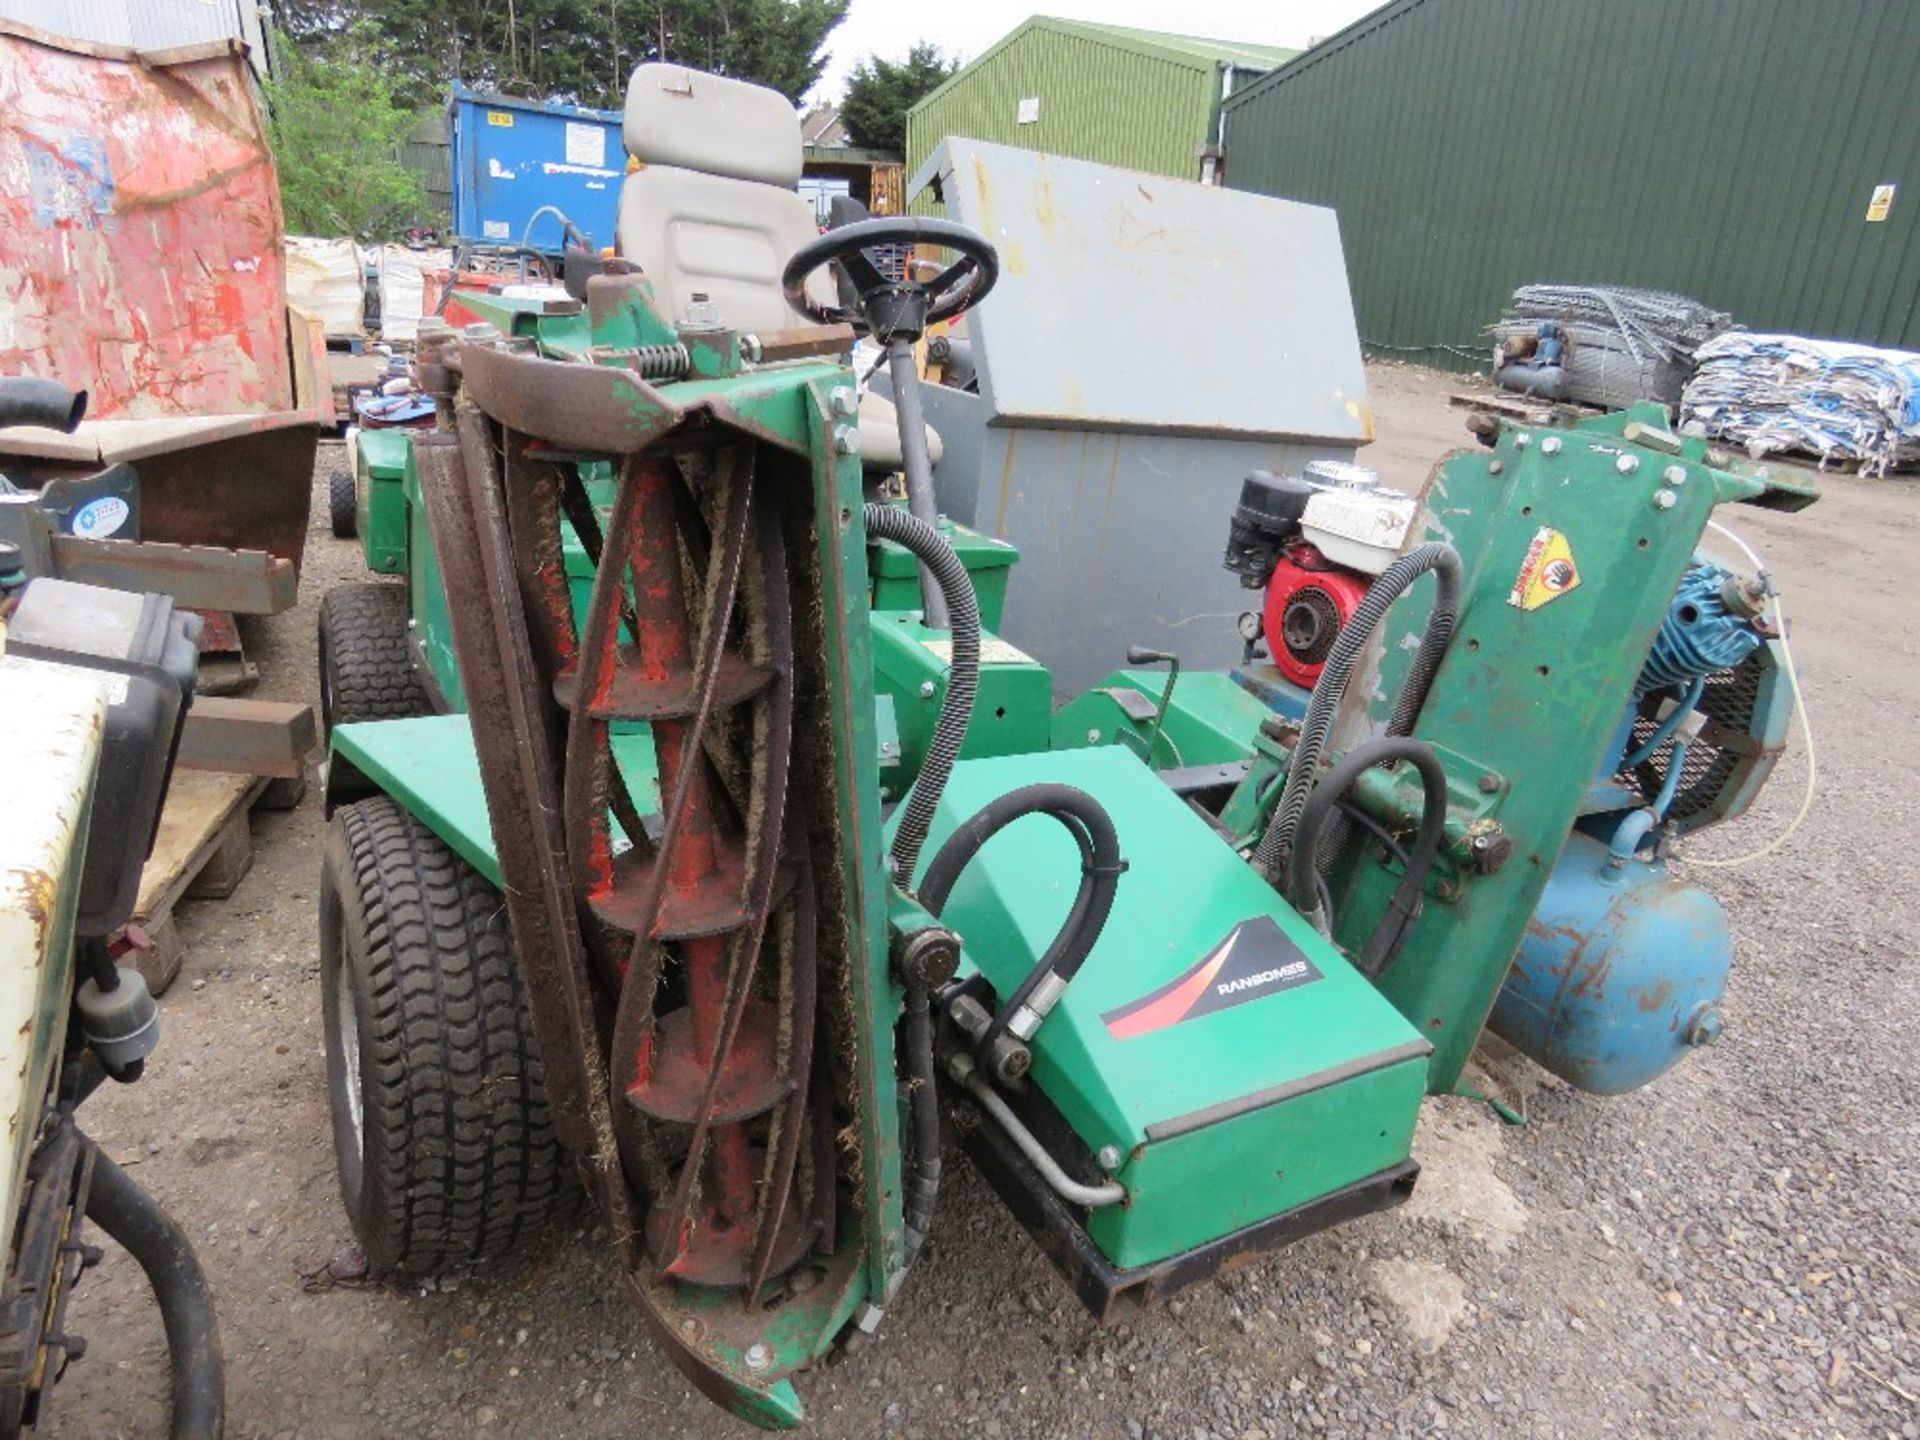 RANSOMES 213 TRIPLE RIDE ON CYLINDER MOWER WITH KUBOTA ENGINE. WHEN TESTED WAS SEEN TO DRIVE, STEER,